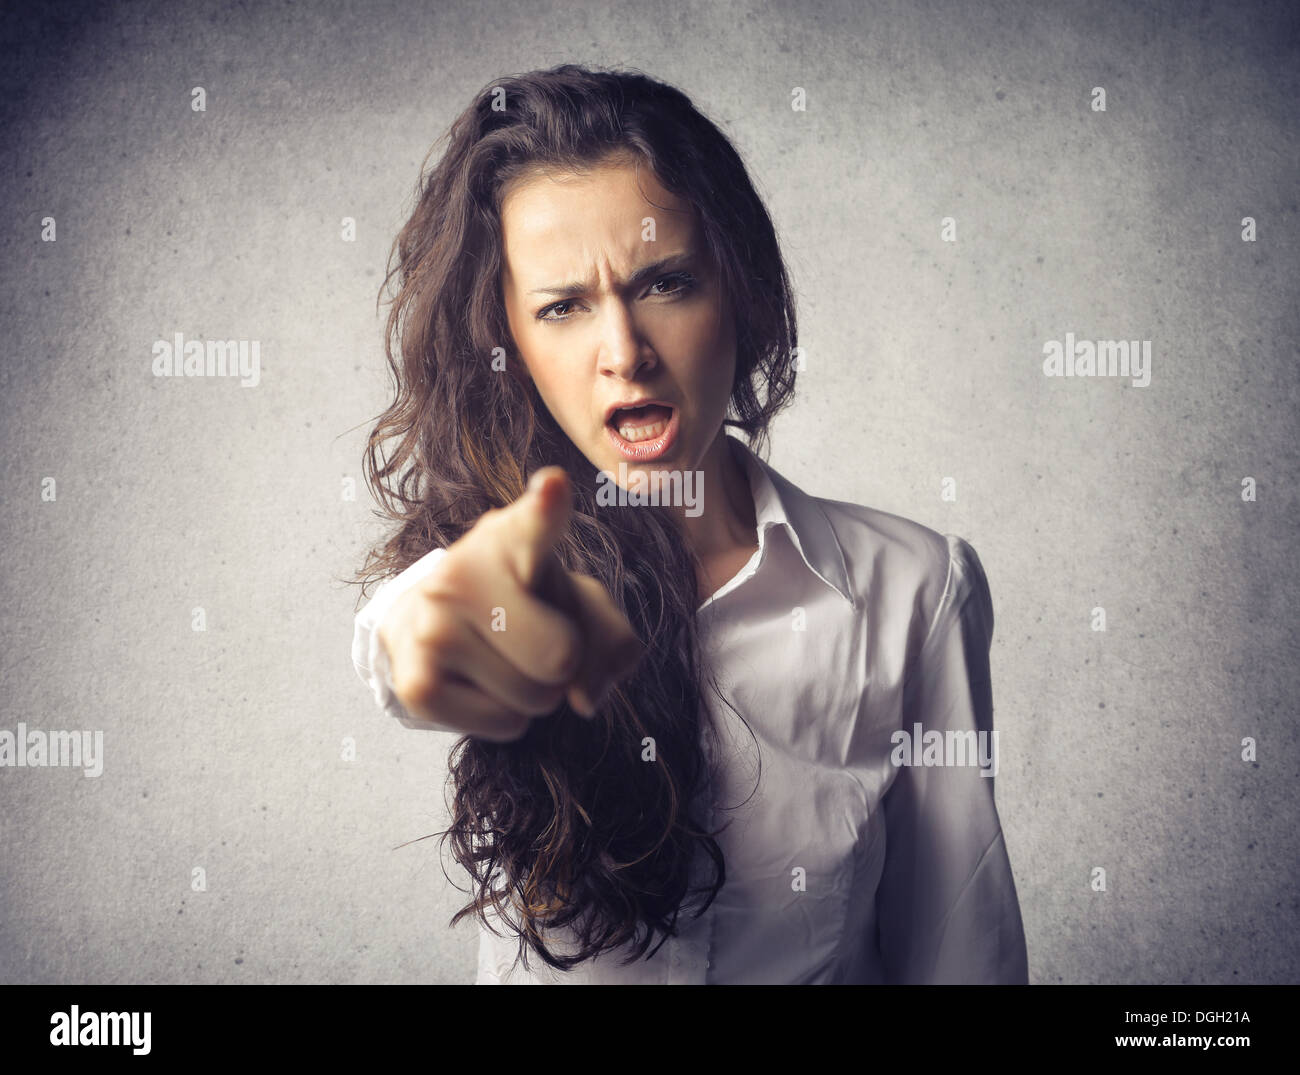 Portrait of a girl accusing someone with her index finger Stock Photo